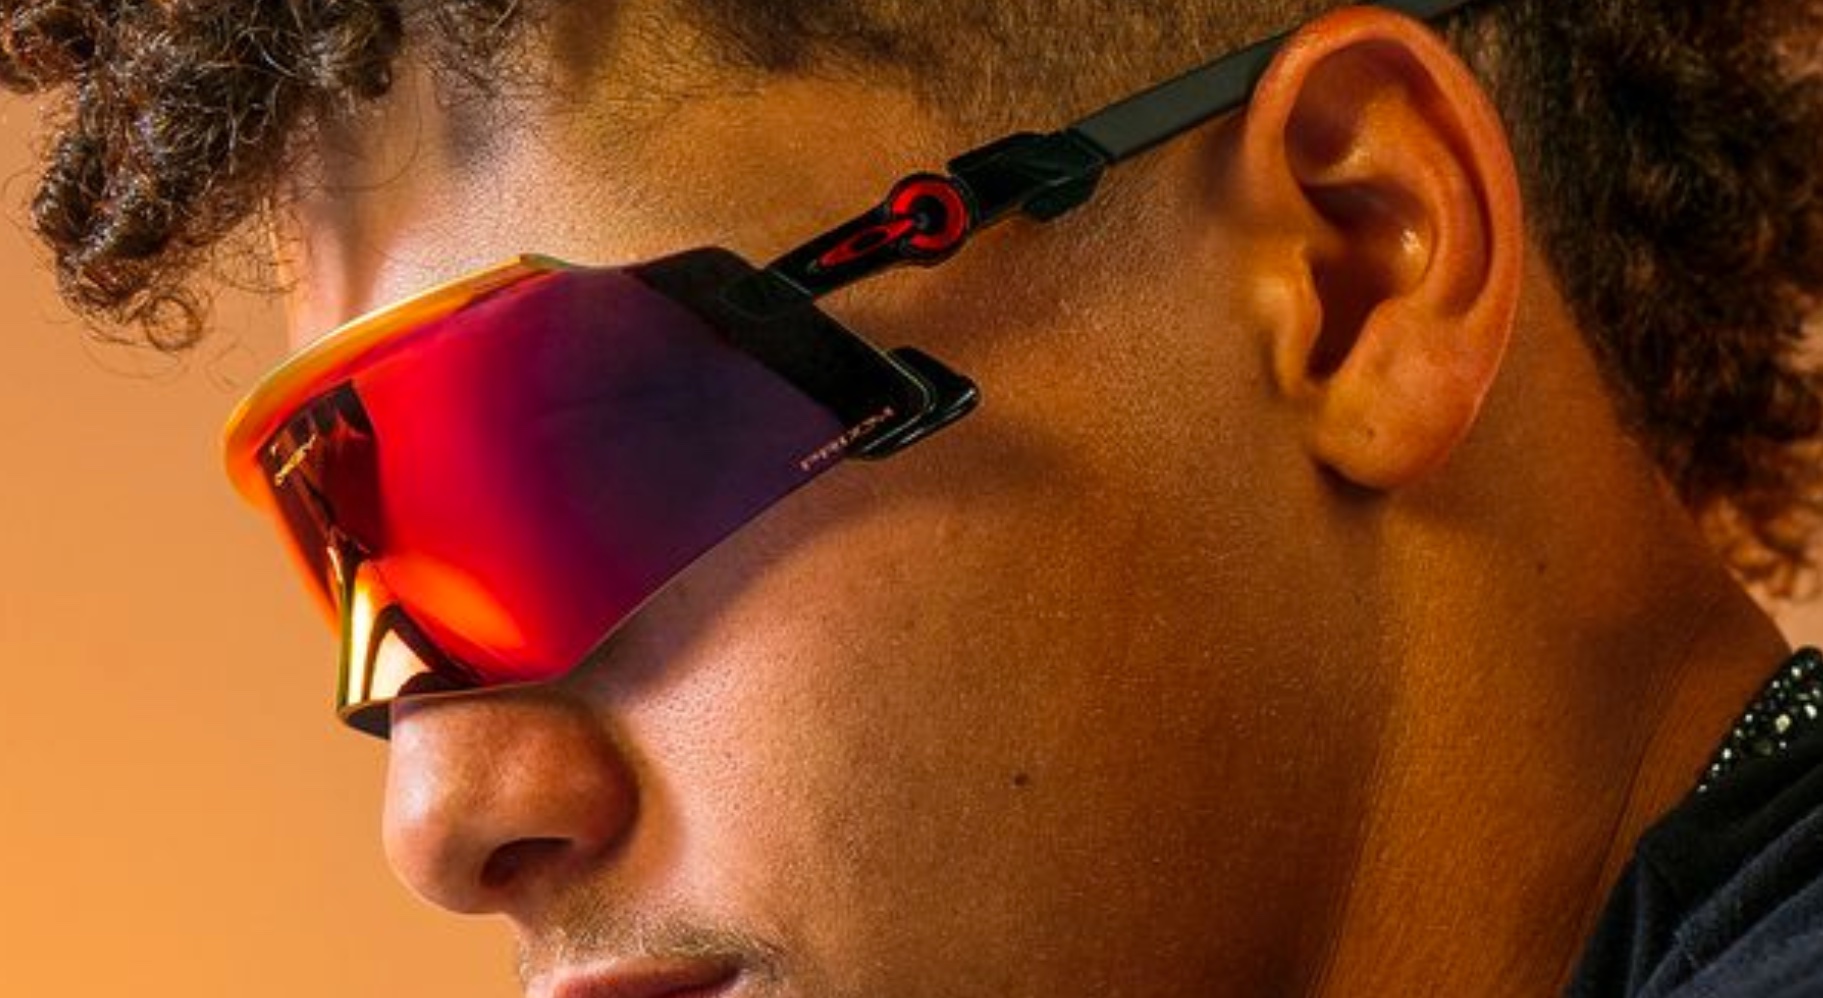 Versterken vermijden timer Oakley drops new 'Kato' sunglasses this summer that are made for sports -  9to5Toys